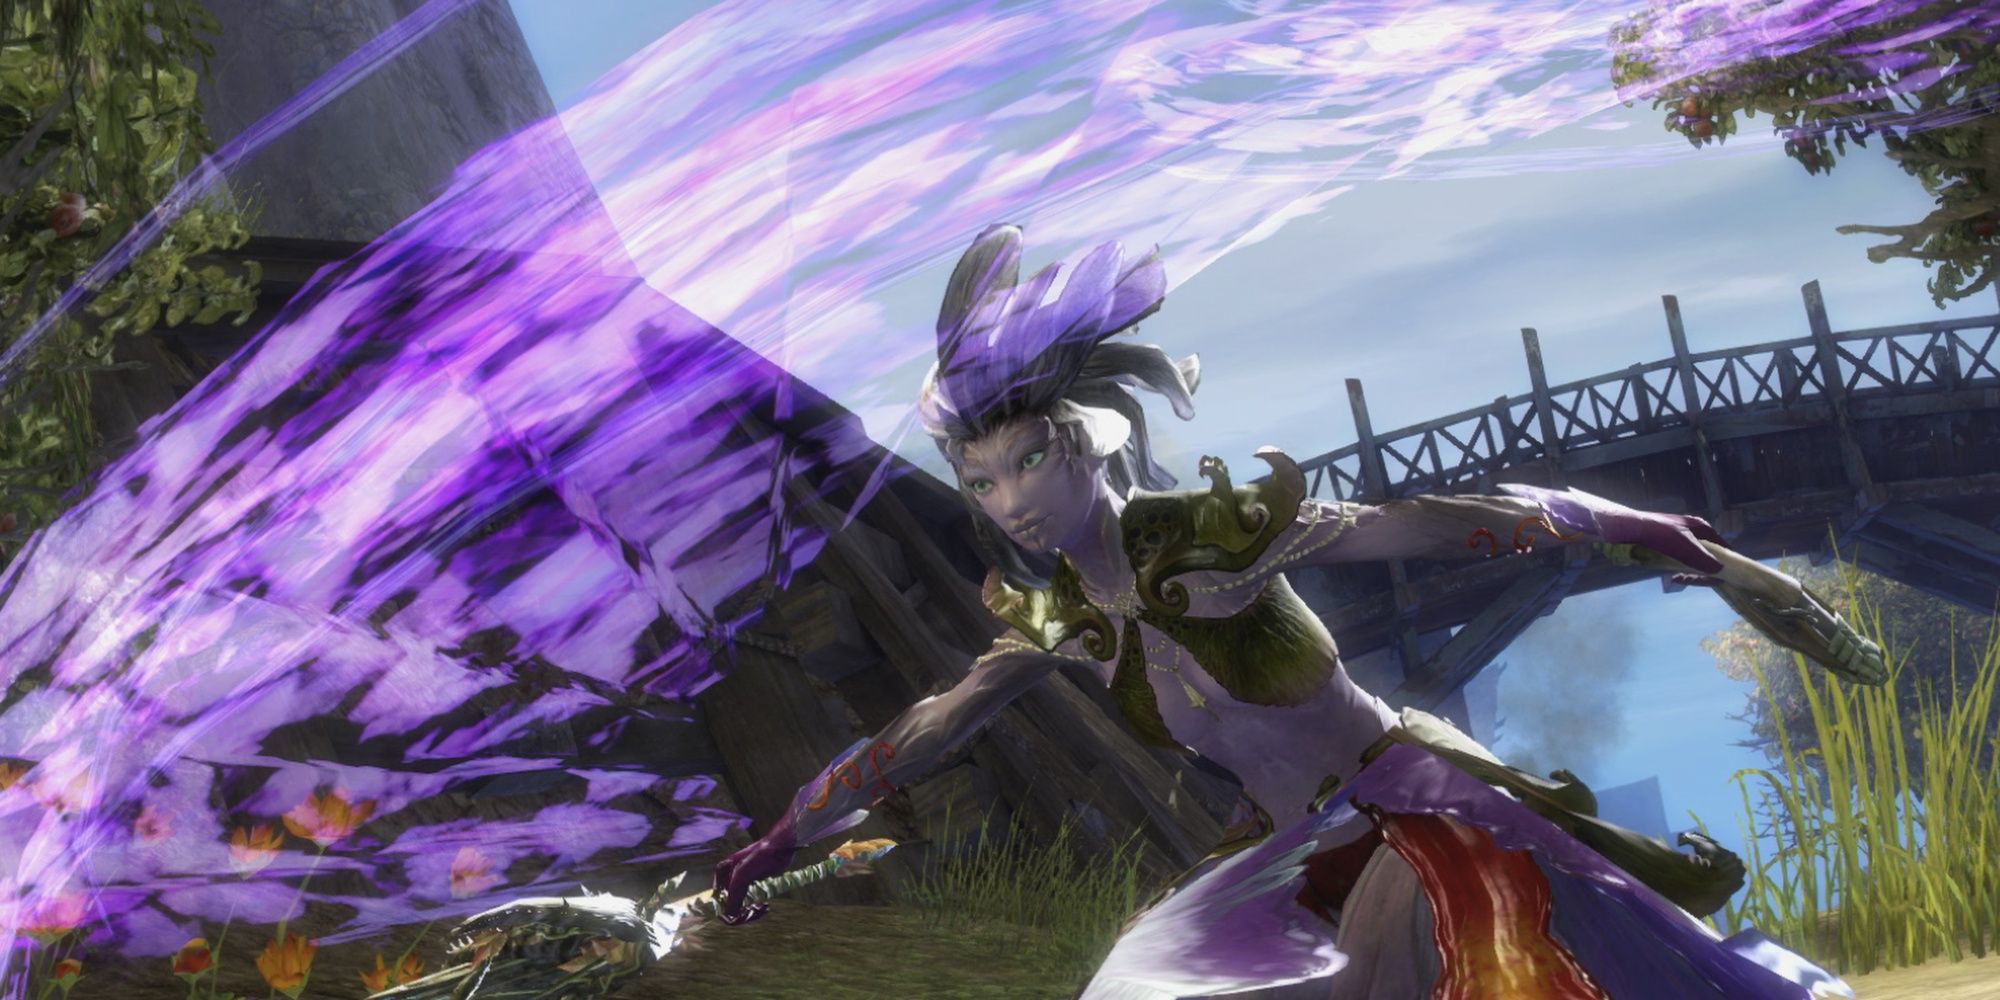 Guild Wars 2 Mesmer Attacking Against A Scenic Background